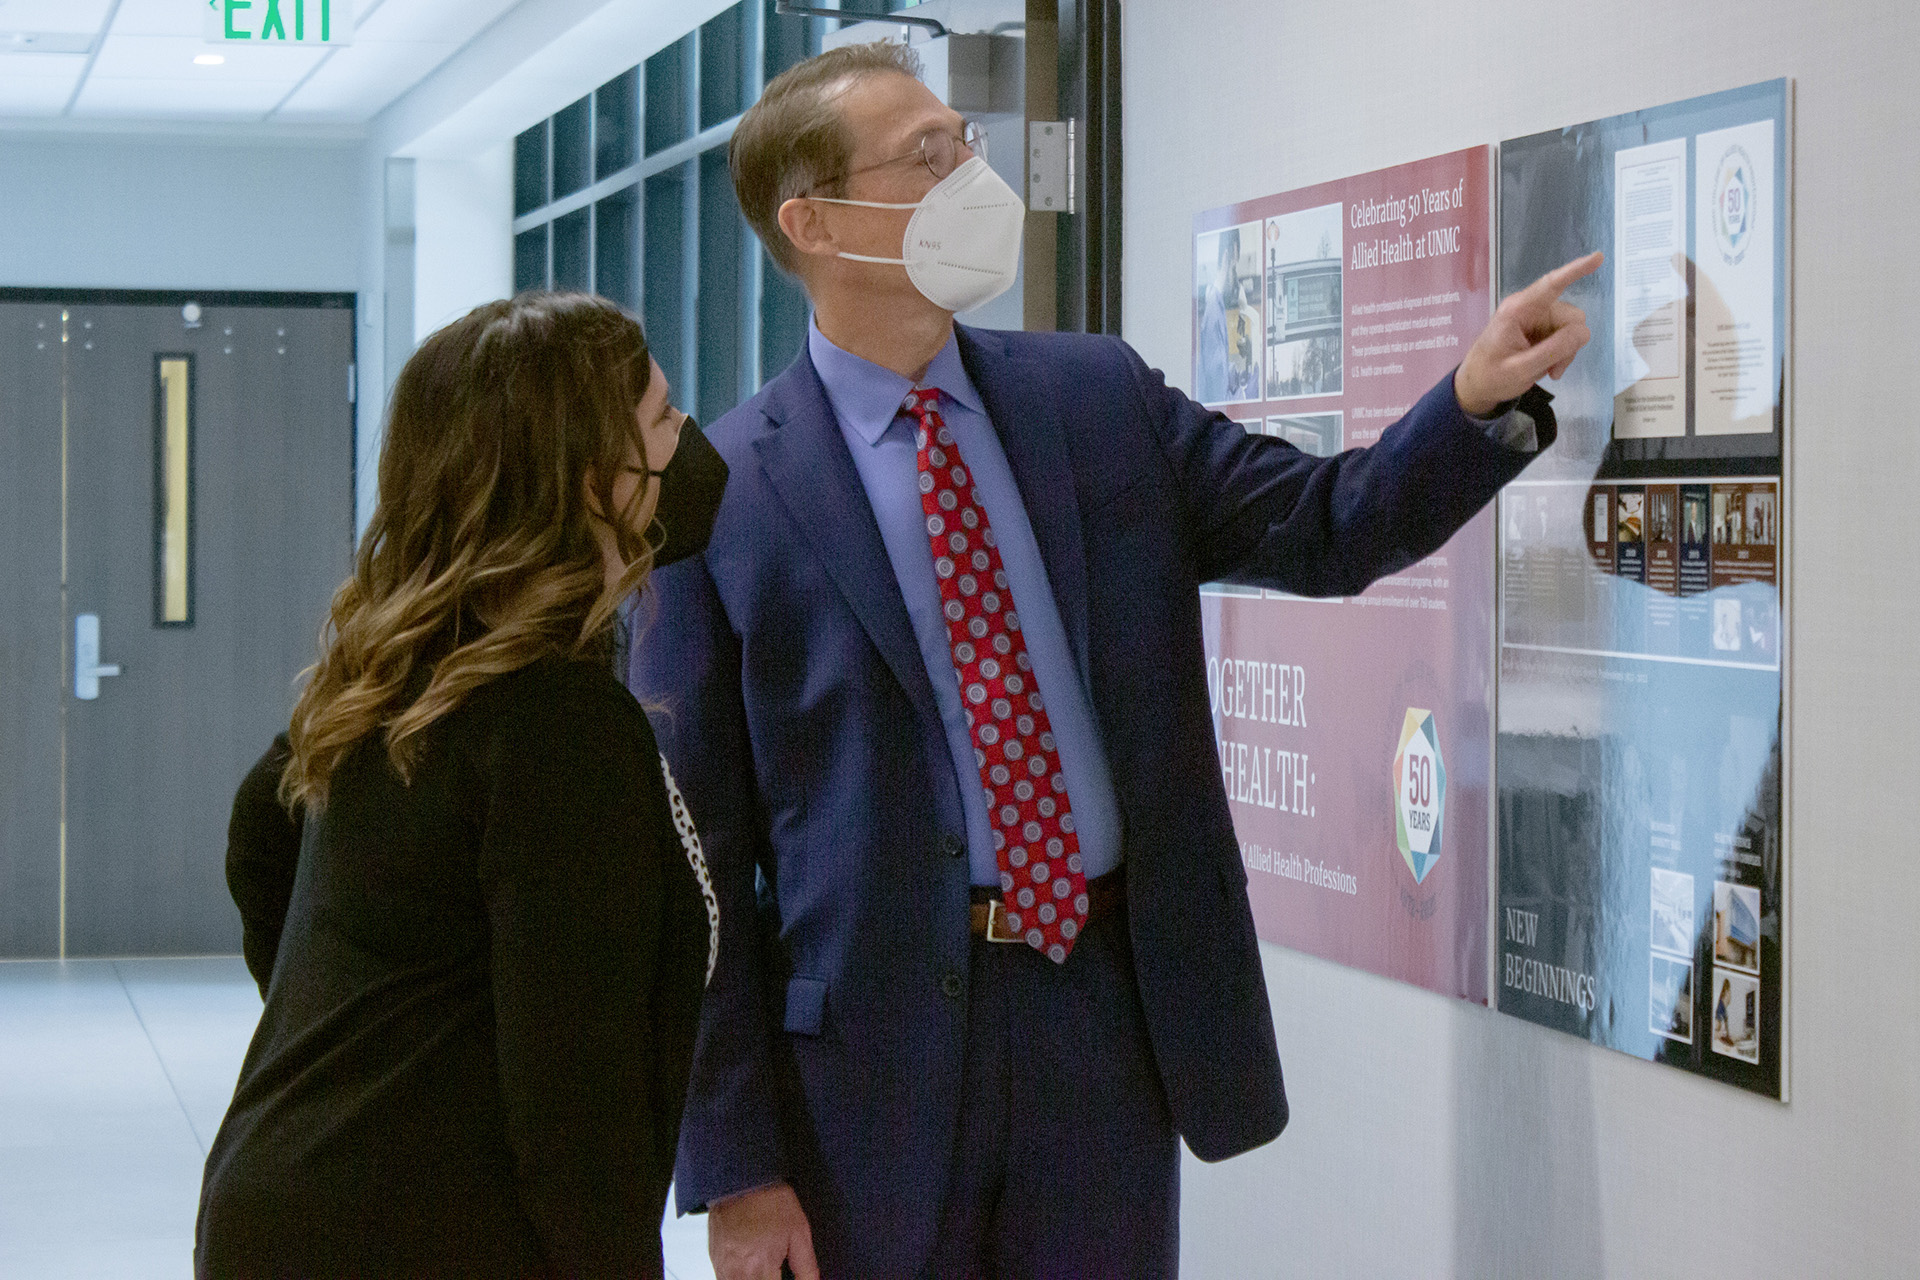 Dean Kyle Meyer&comma; PhD&comma; and Tammy Webster&comma; PhD&comma; assistant dean for academic affairs in the UNMC College of Allied Health Professions&comma; view the 50th anniversary display in the Wigton Heritage Center of the history of the college&period;